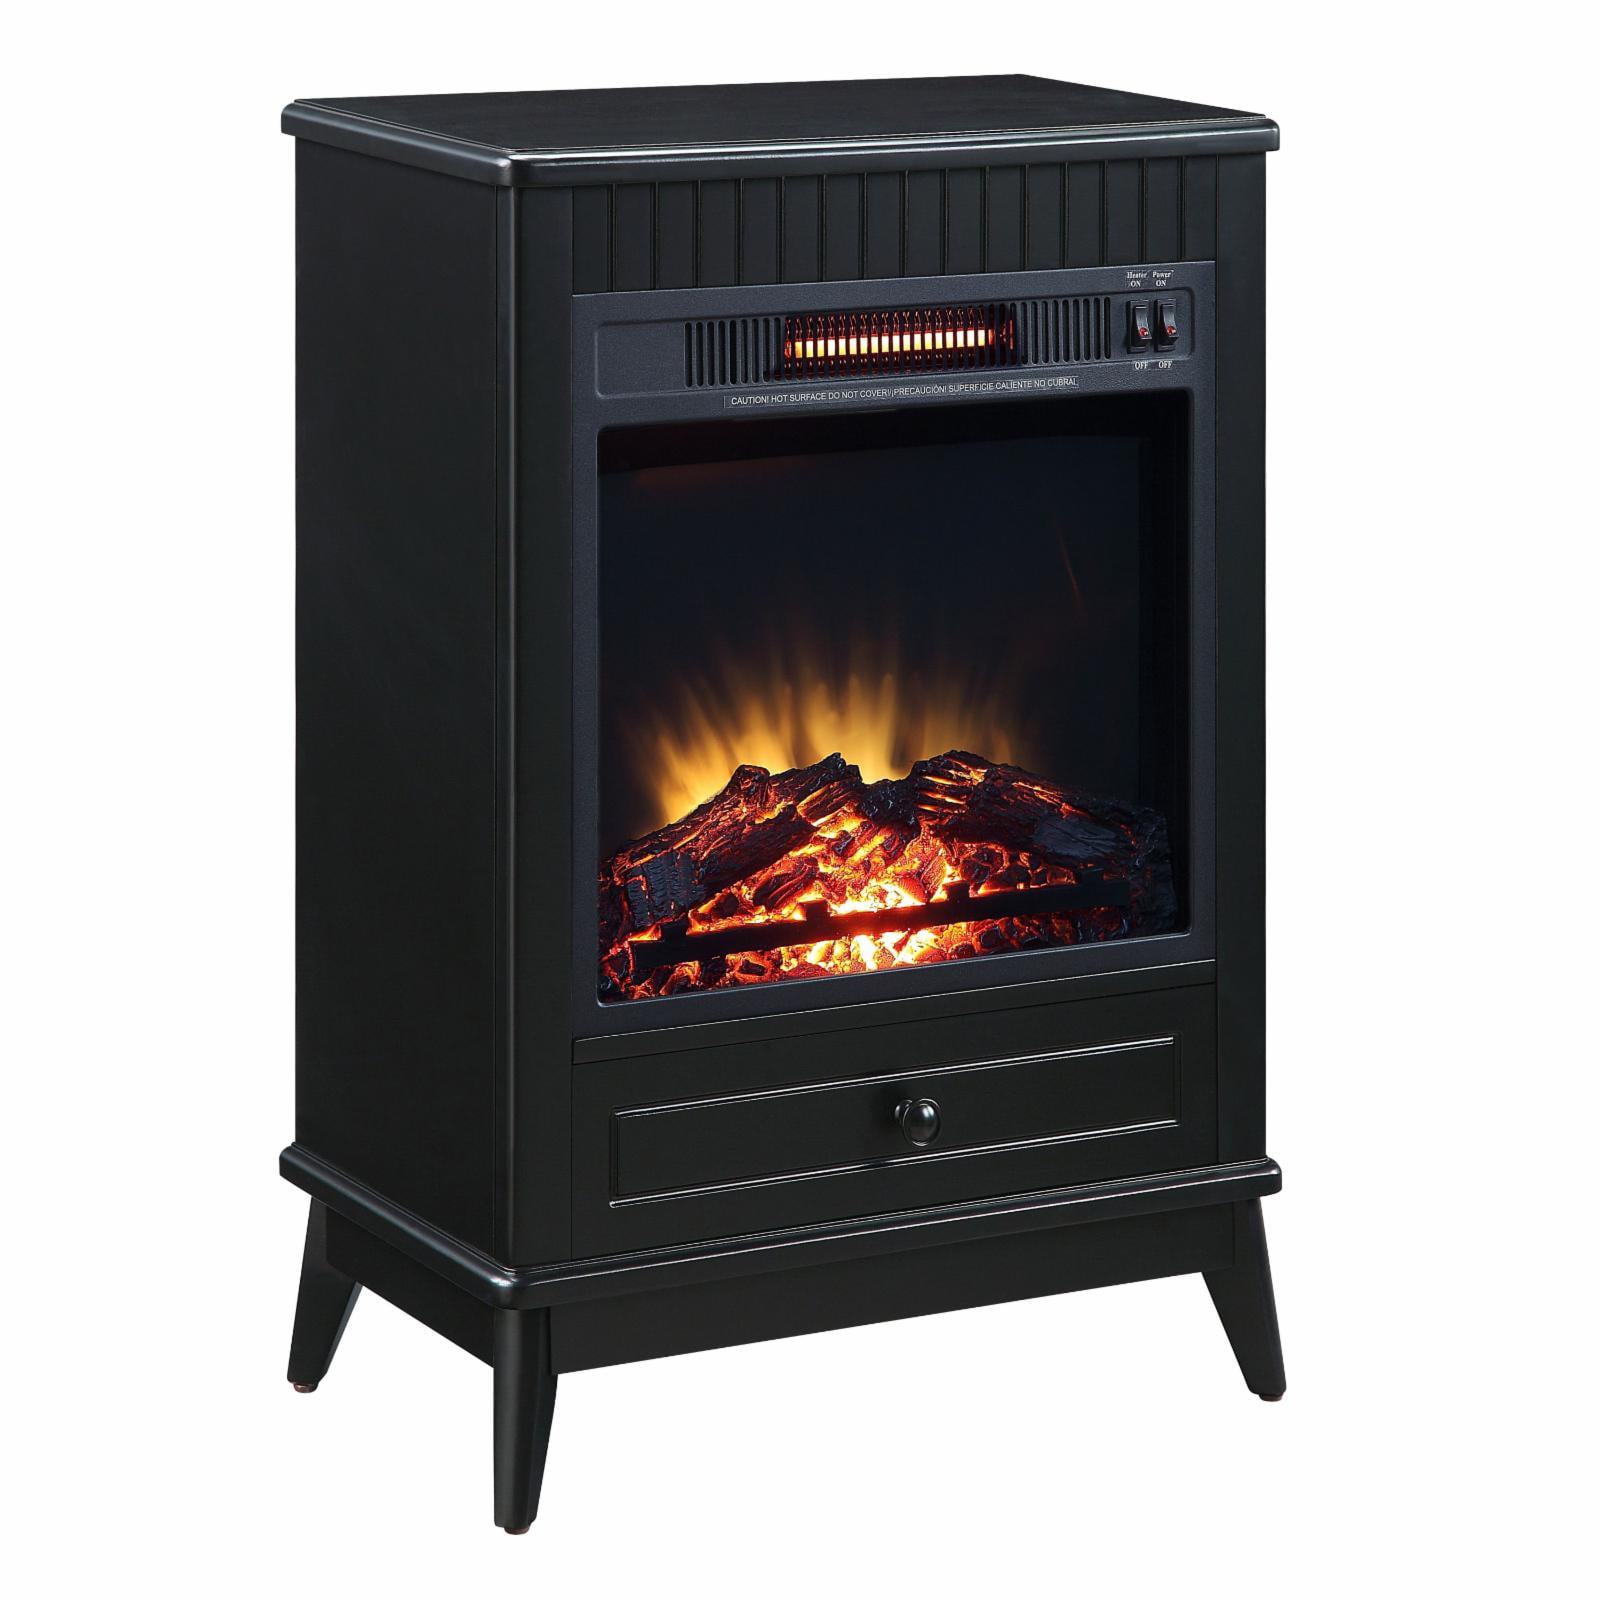 Picture of Acme Furniture AC00851 22 x 13 x 32 in. Hamish Fireplace, Black